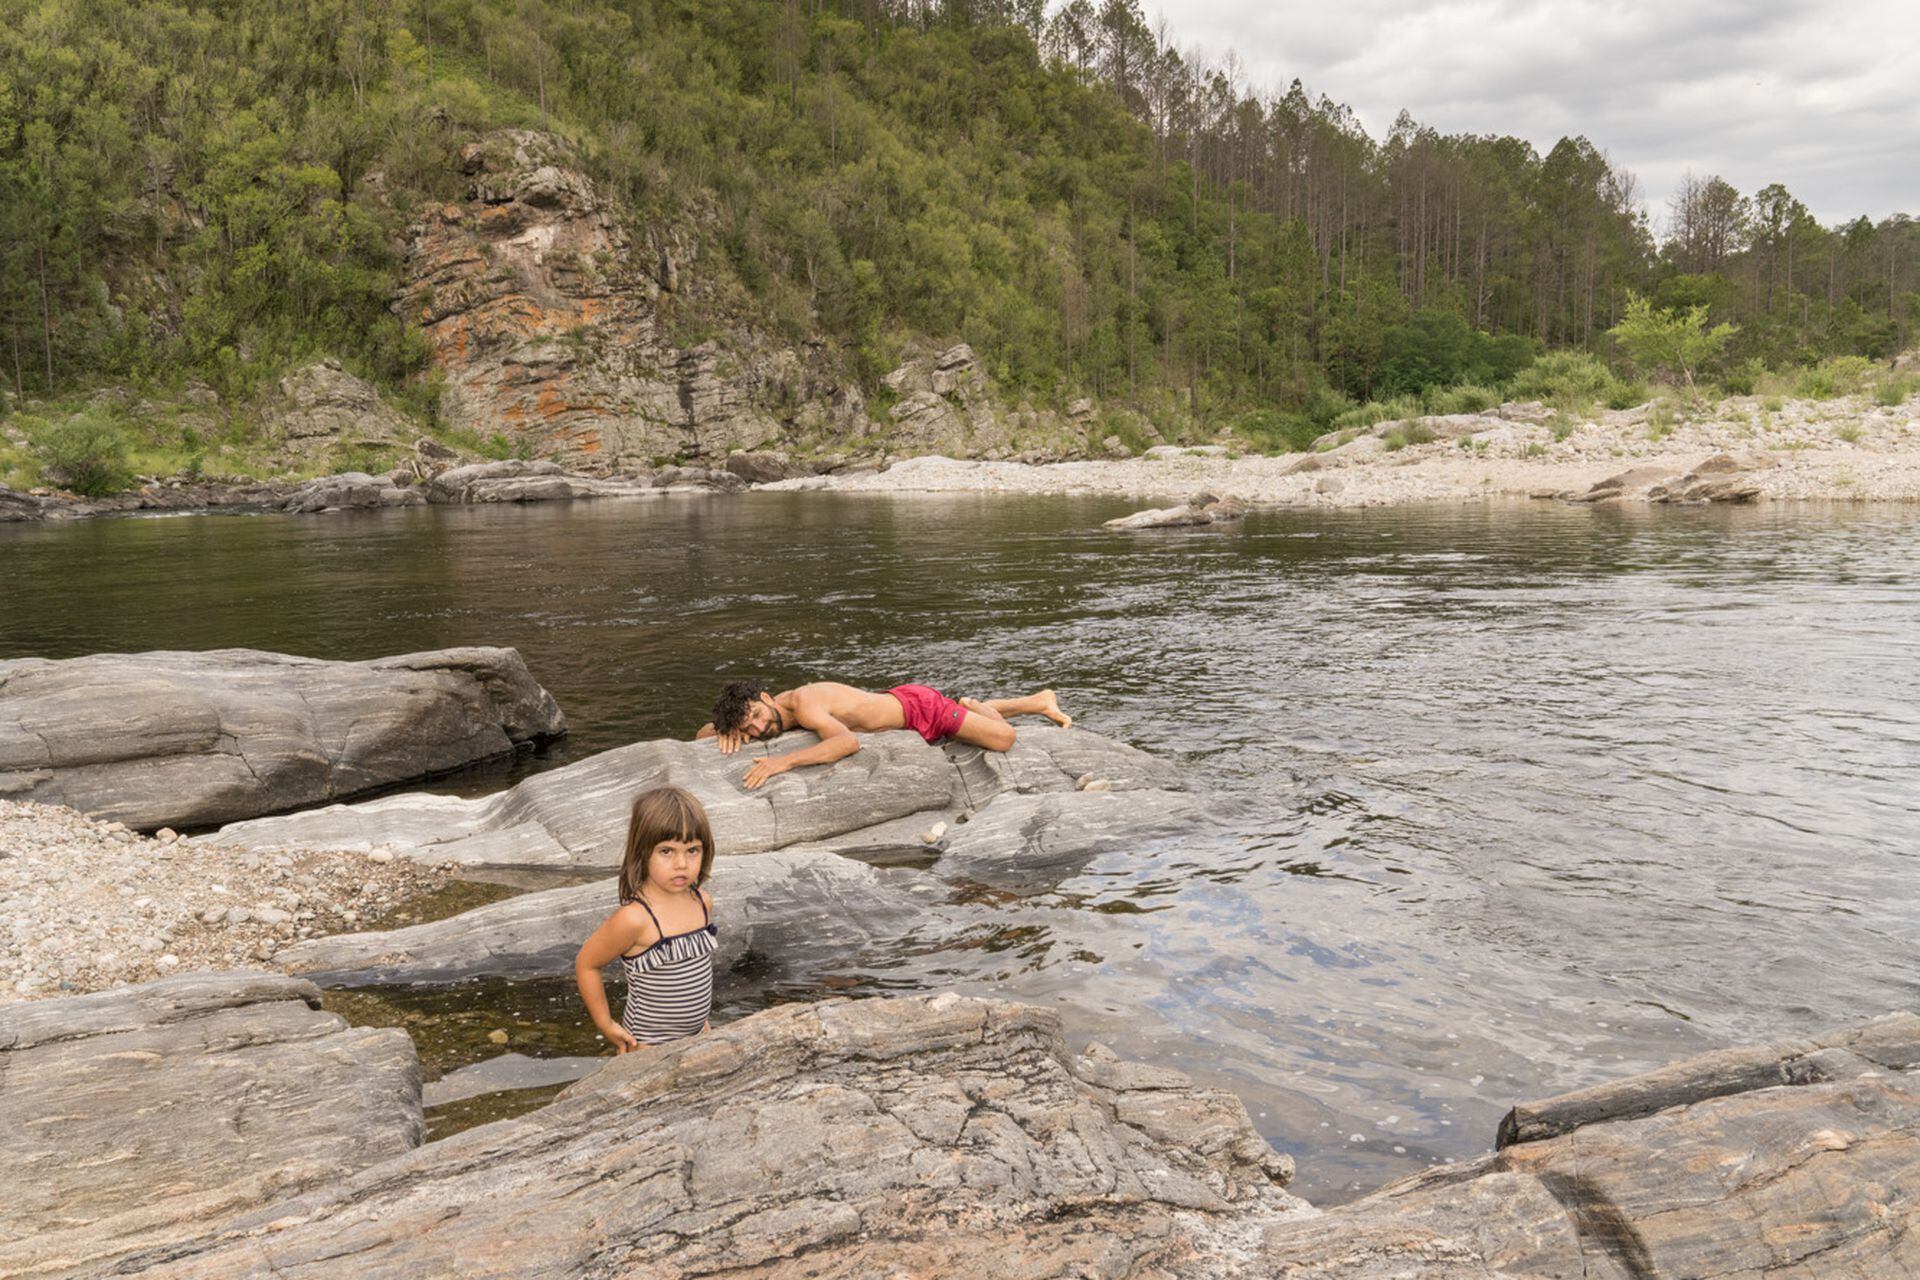 Relax on the stones that border the Rio Grande.  Three of the original nine hectares of Umepay overlook that wild river.  The ecovillage took the name of the hill in front, which in the original language means 